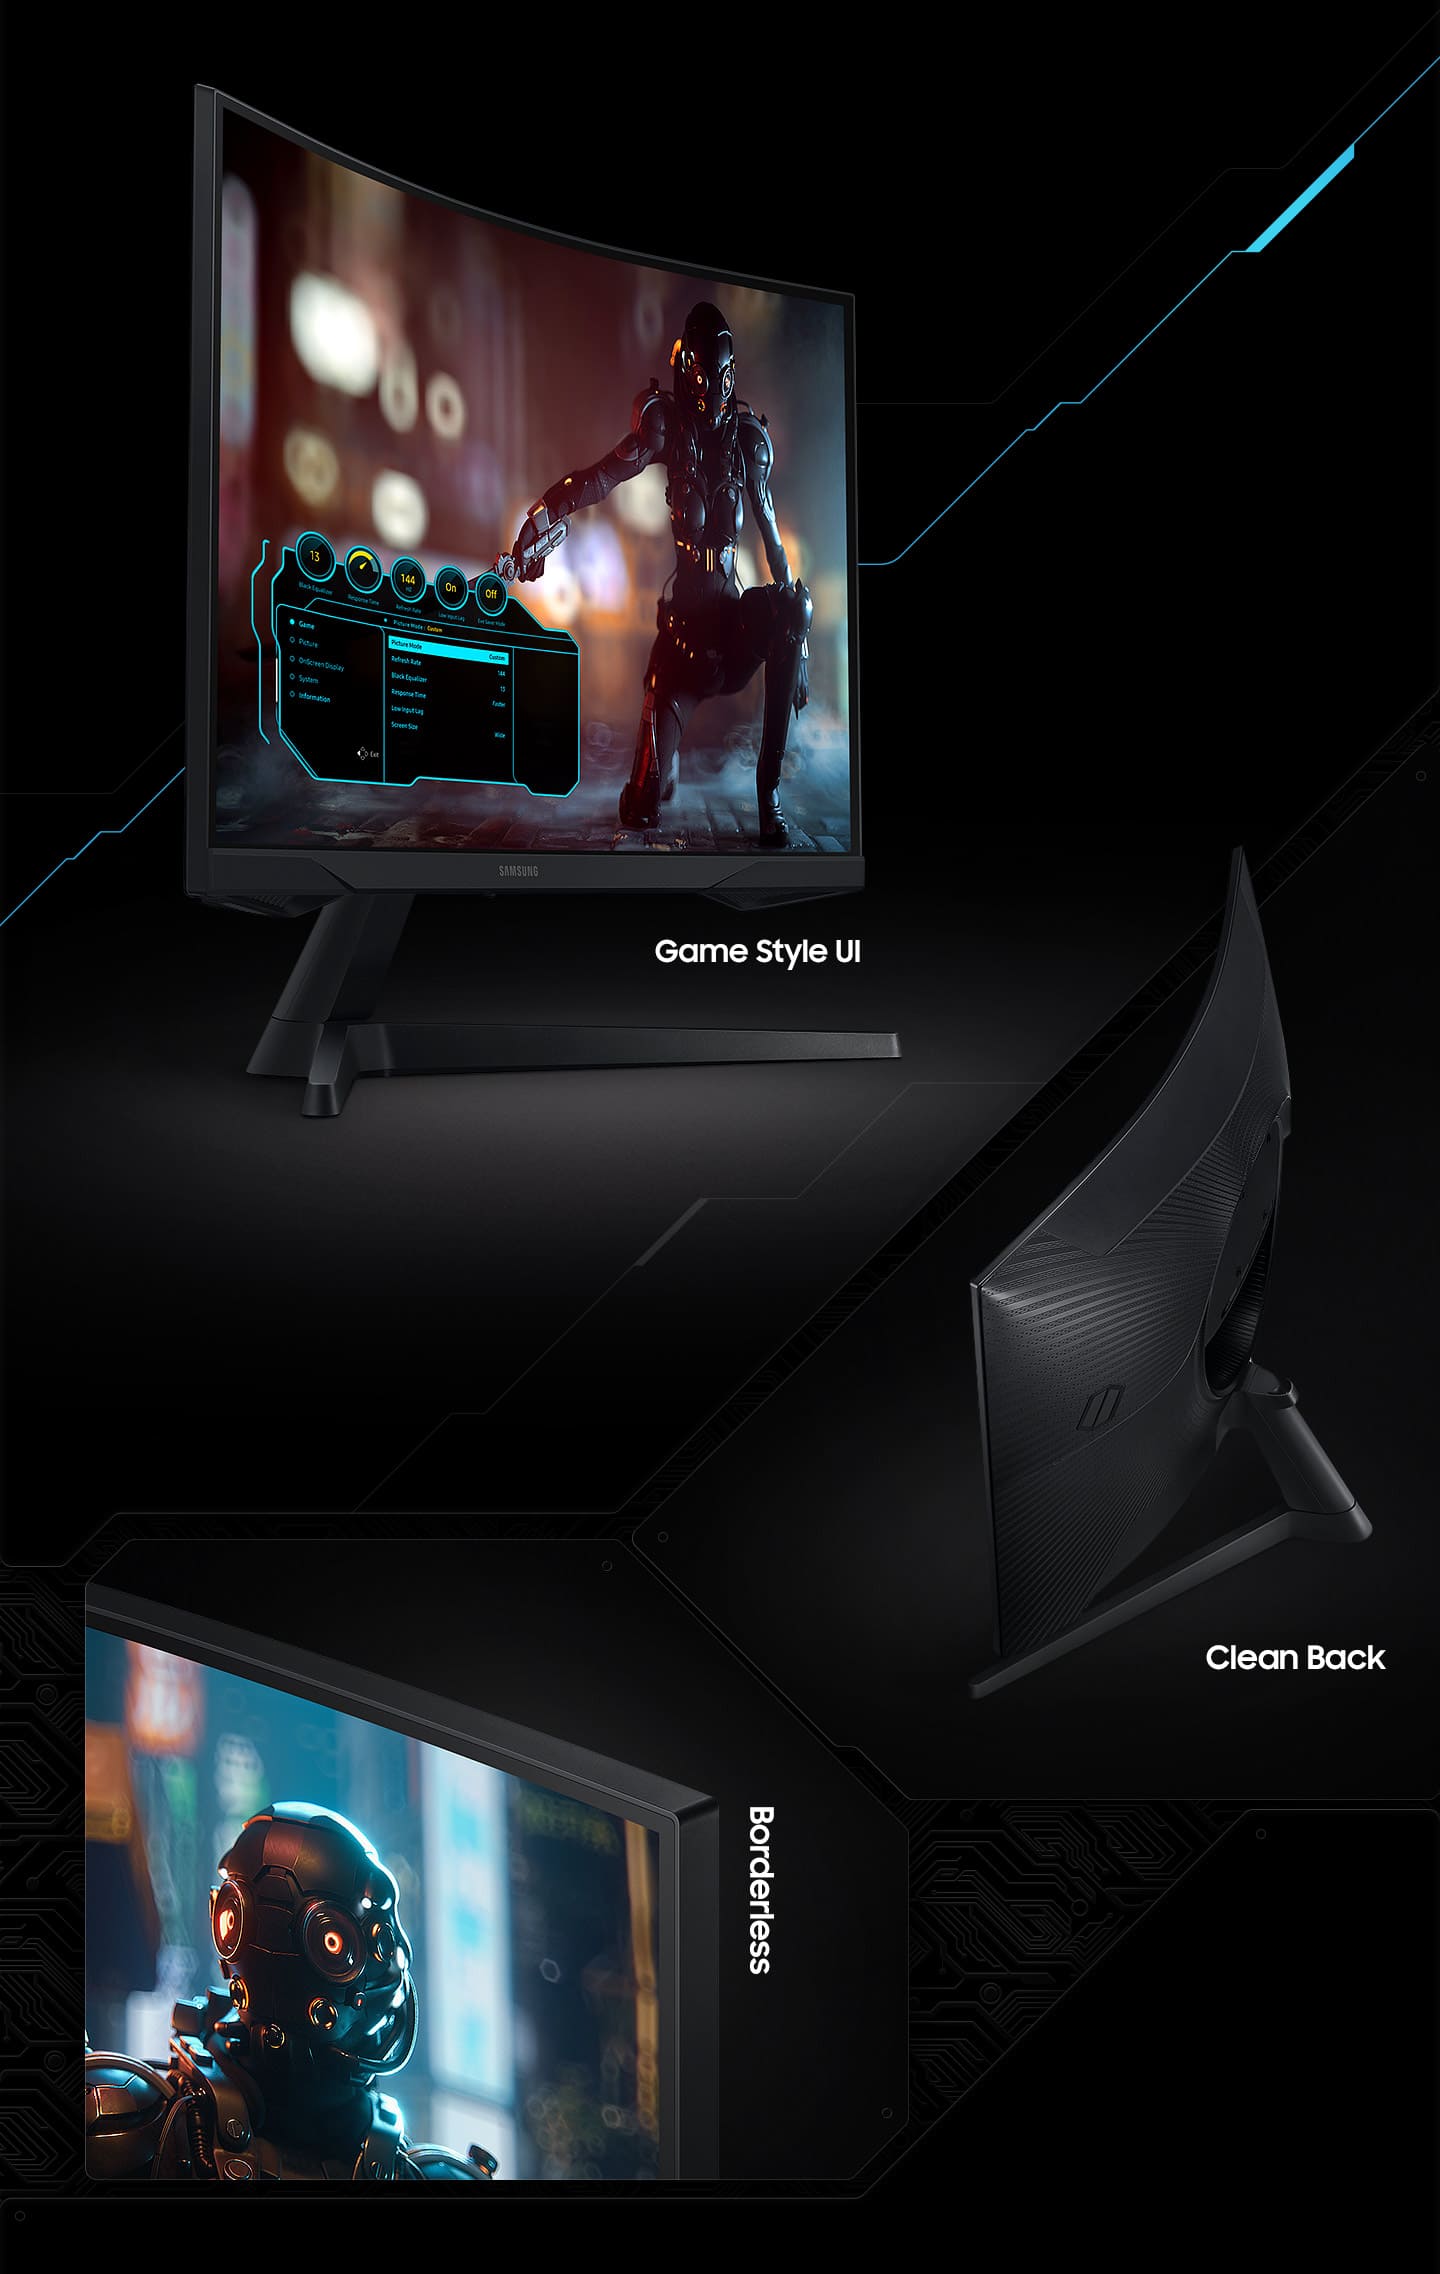 SAMSUNG Curved Gaming Monitor with WQHD resolution